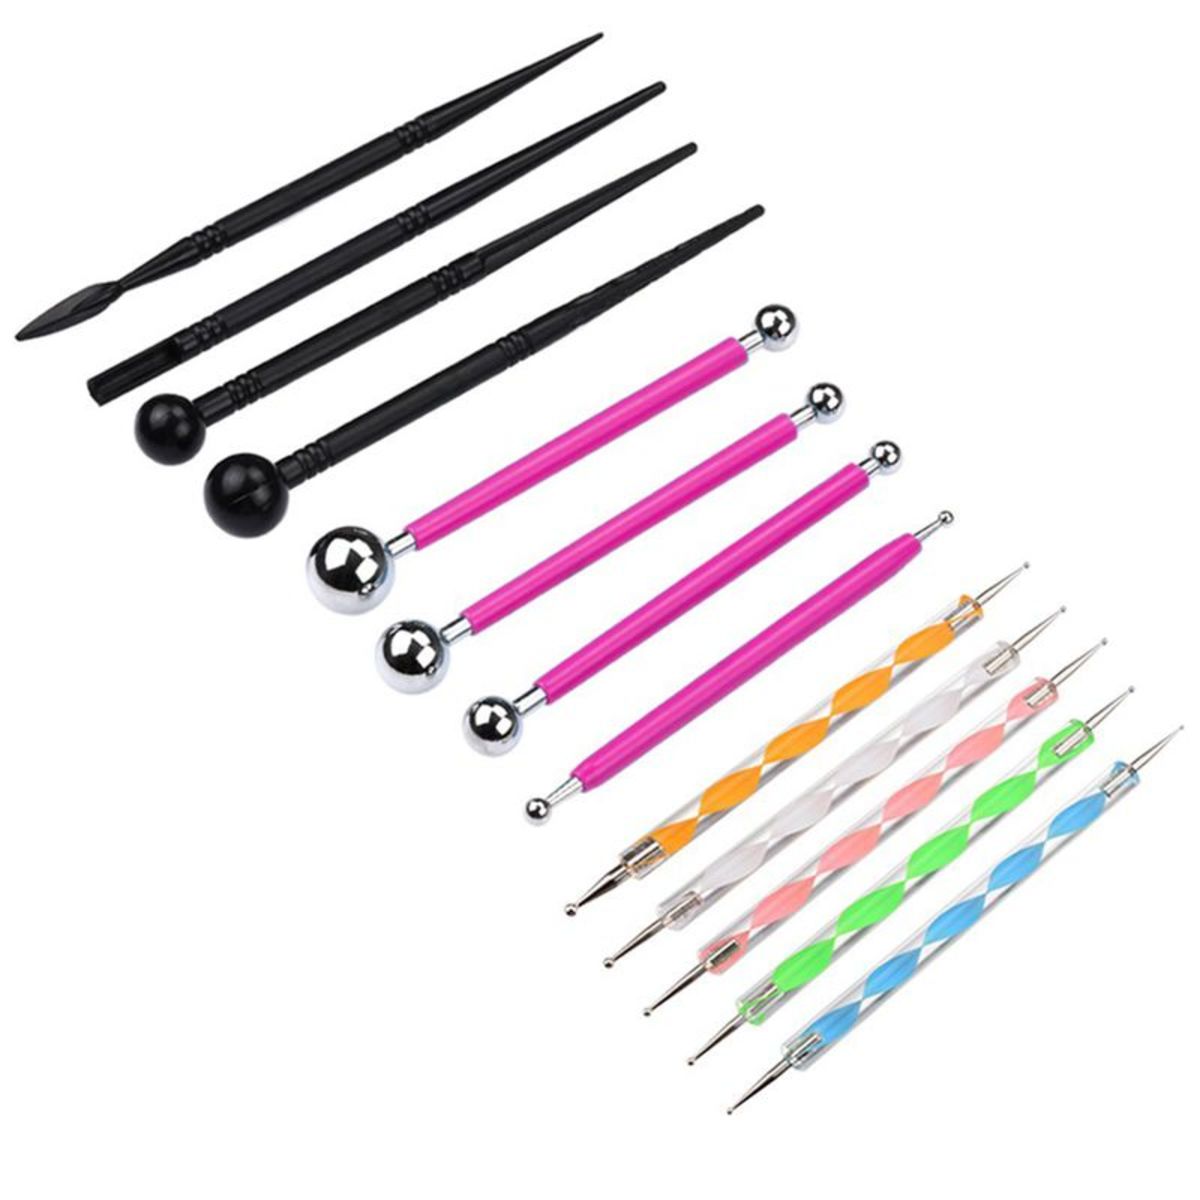 Dot painting tools are similar to those used for nail painting